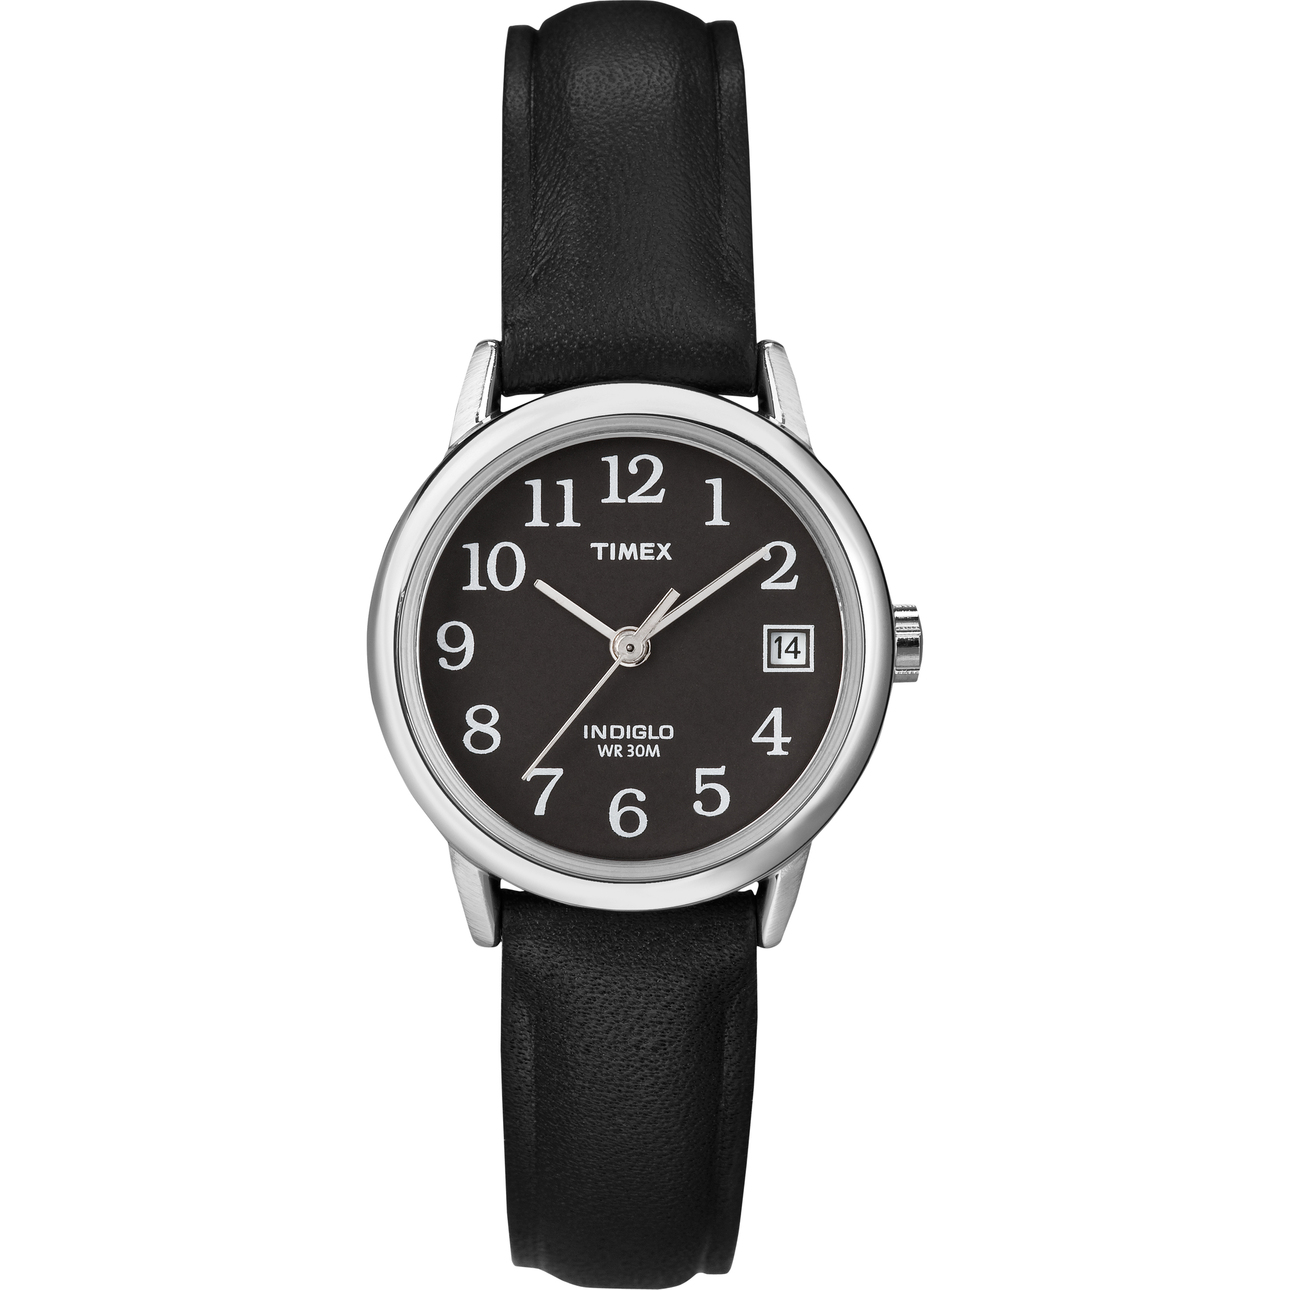 Timex Women's Easy Reader Date Black/Silver 25mm Casual Watch, Leather Strap - image 1 of 3